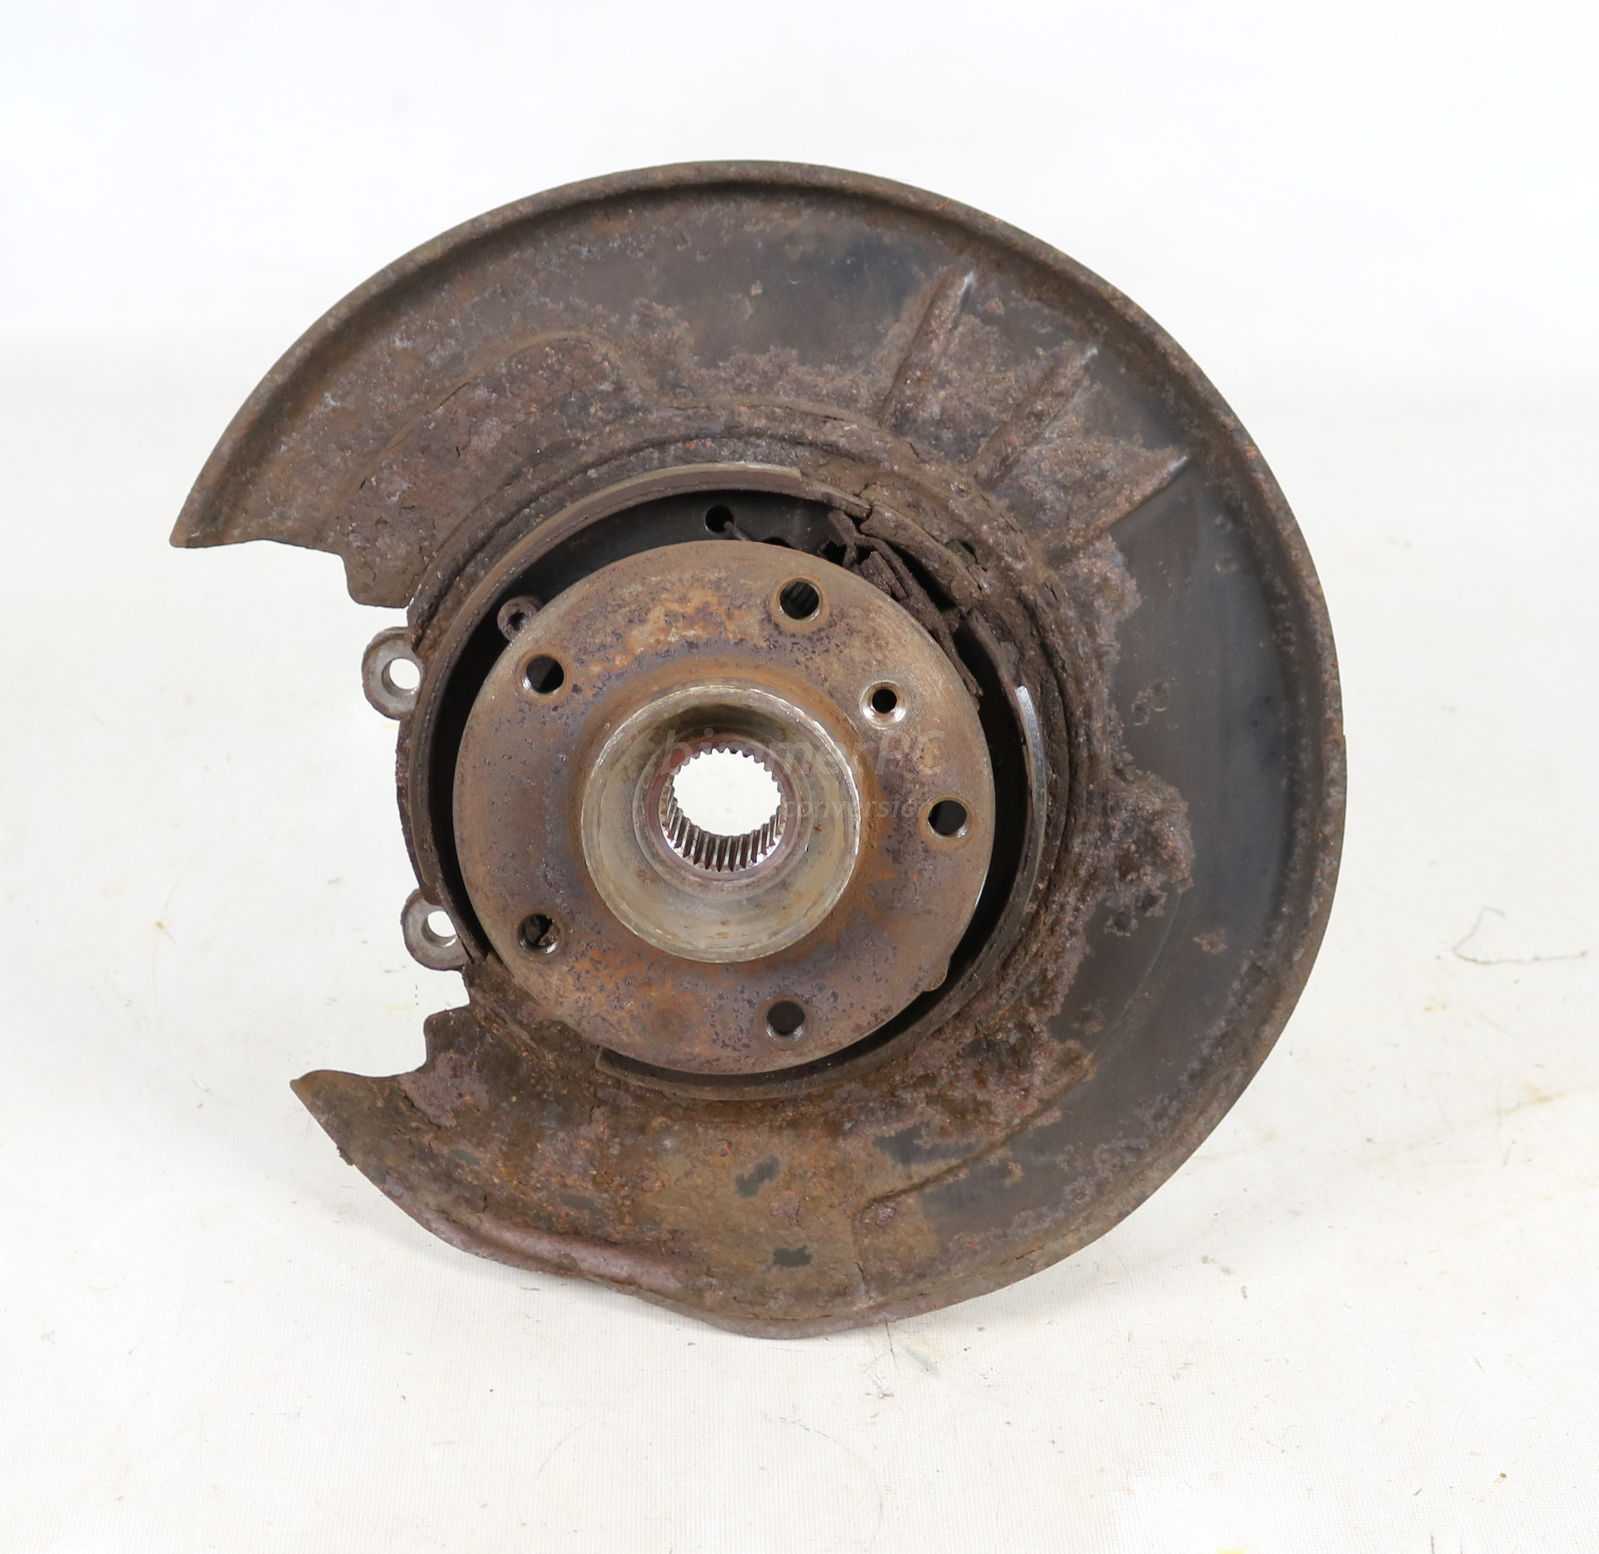 Primary image for BMW E38 7-Series Right Rear Wheel Bearing Carrier Hub Knuckle 1995-2001 OEM